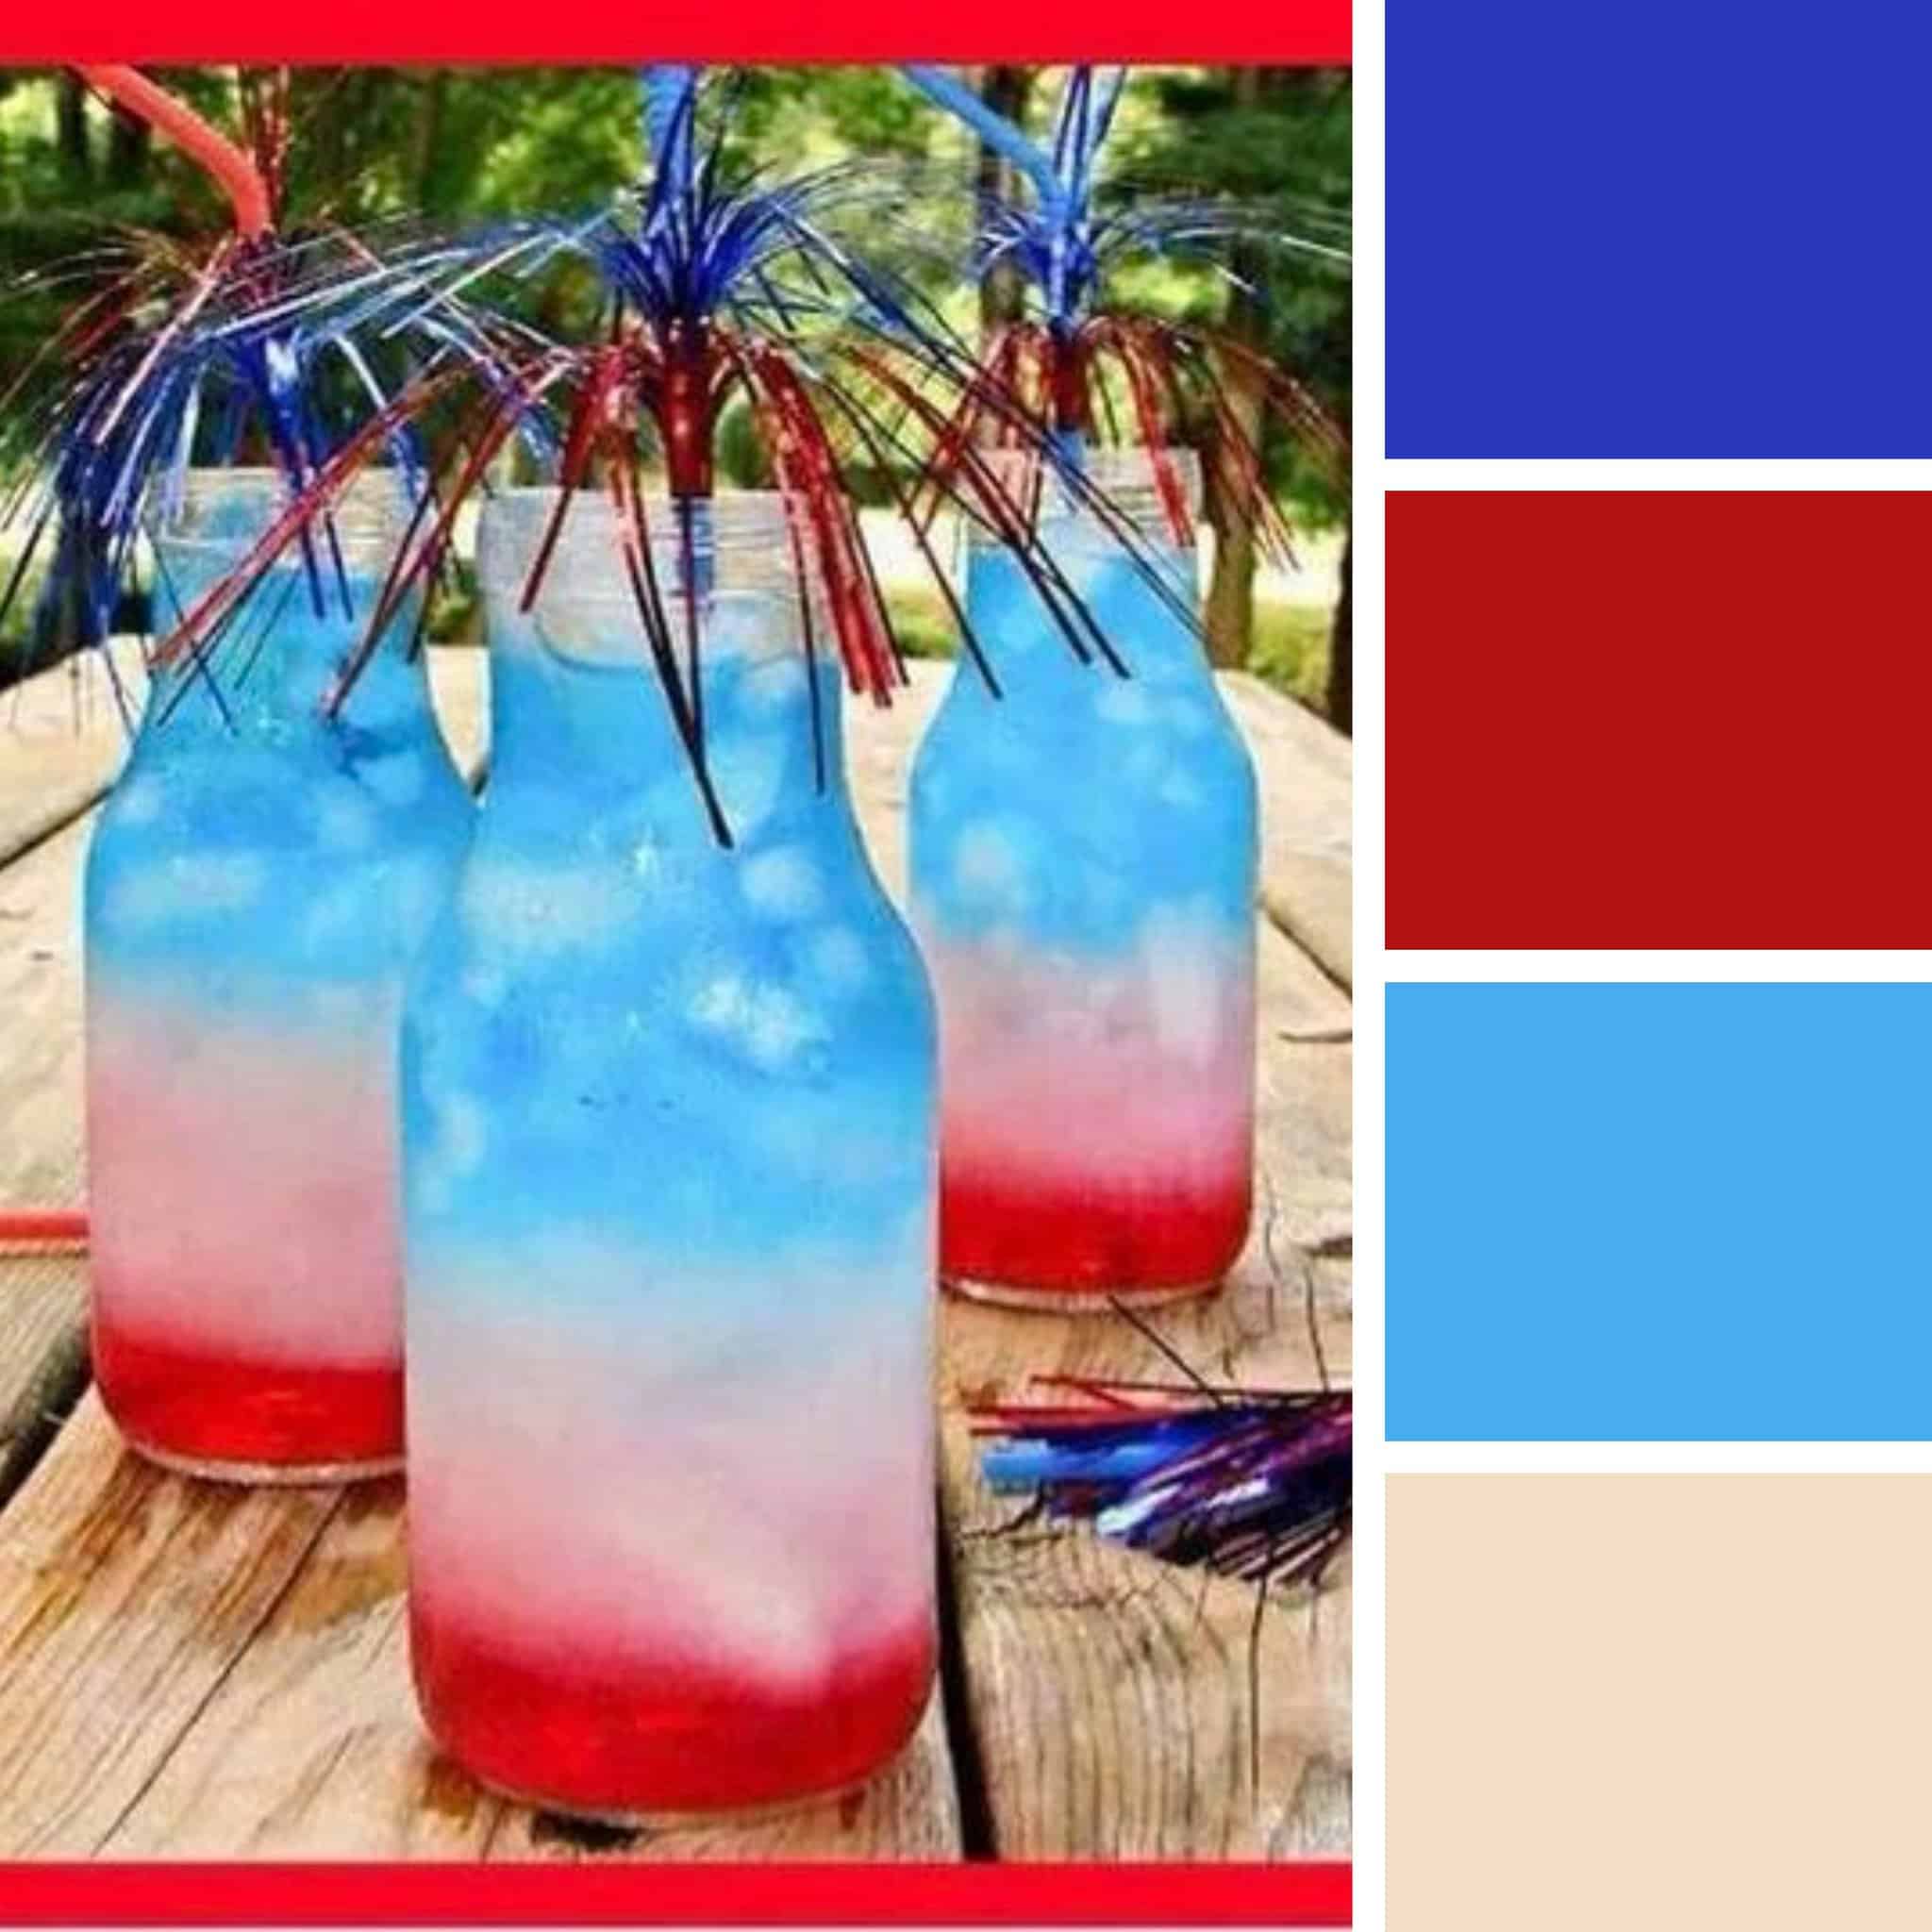 A photo of three drinks in red, white and blue, with coordinating color squares going down the right side of the image.